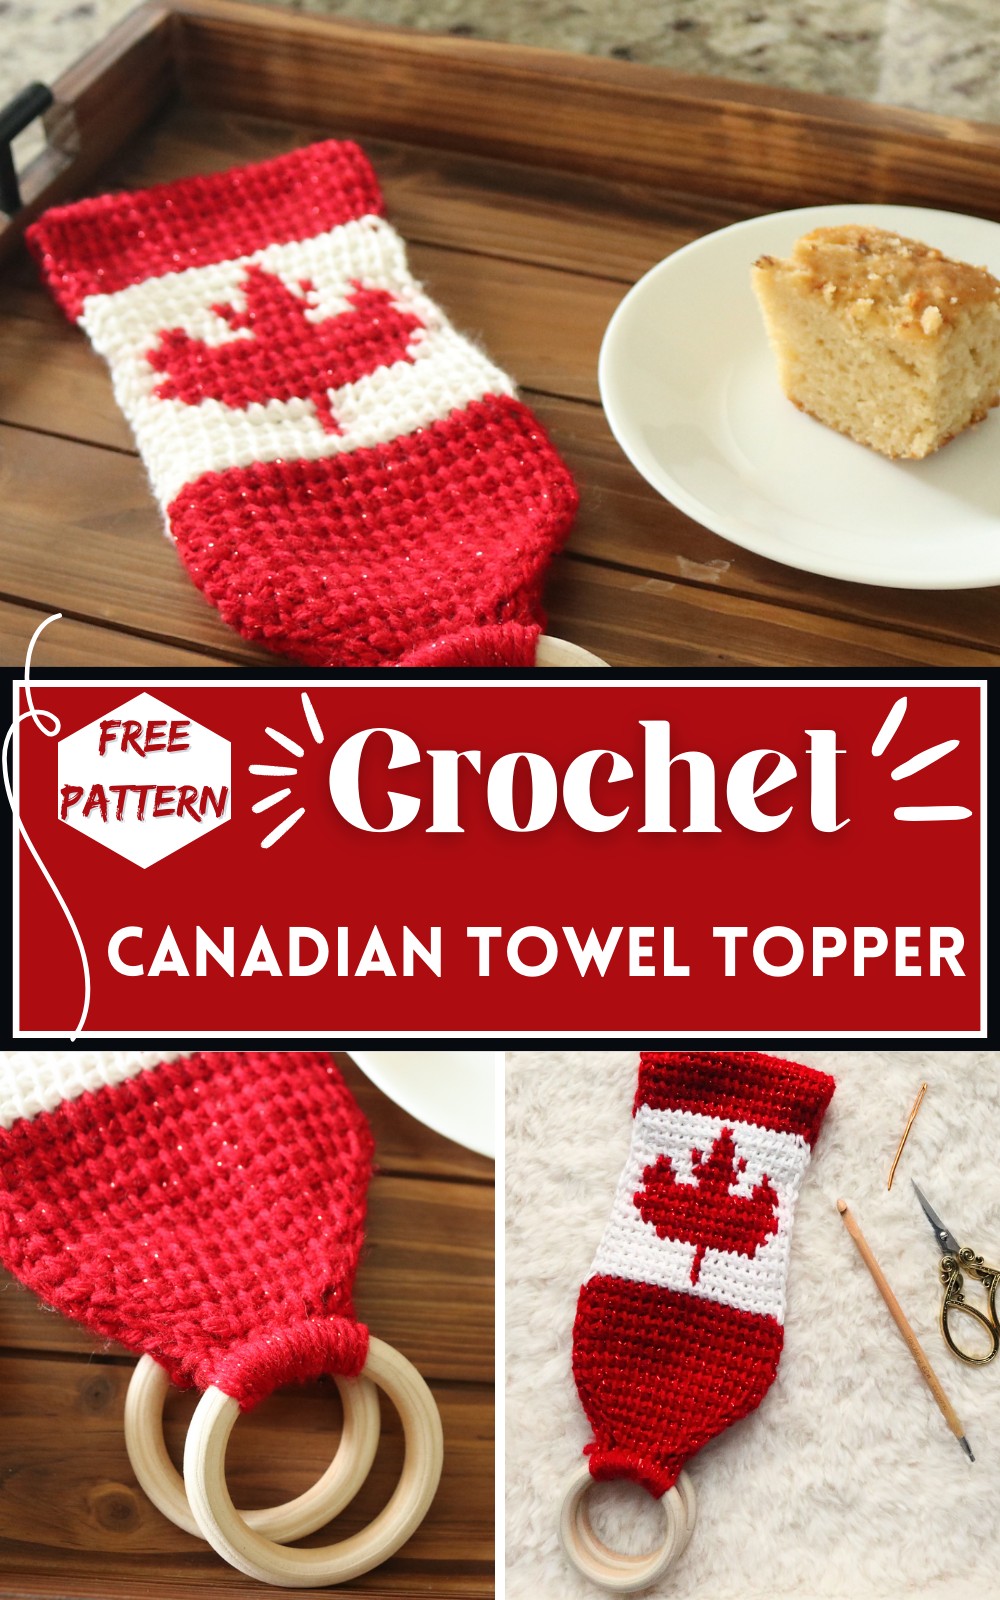 Canadian Towel Topper